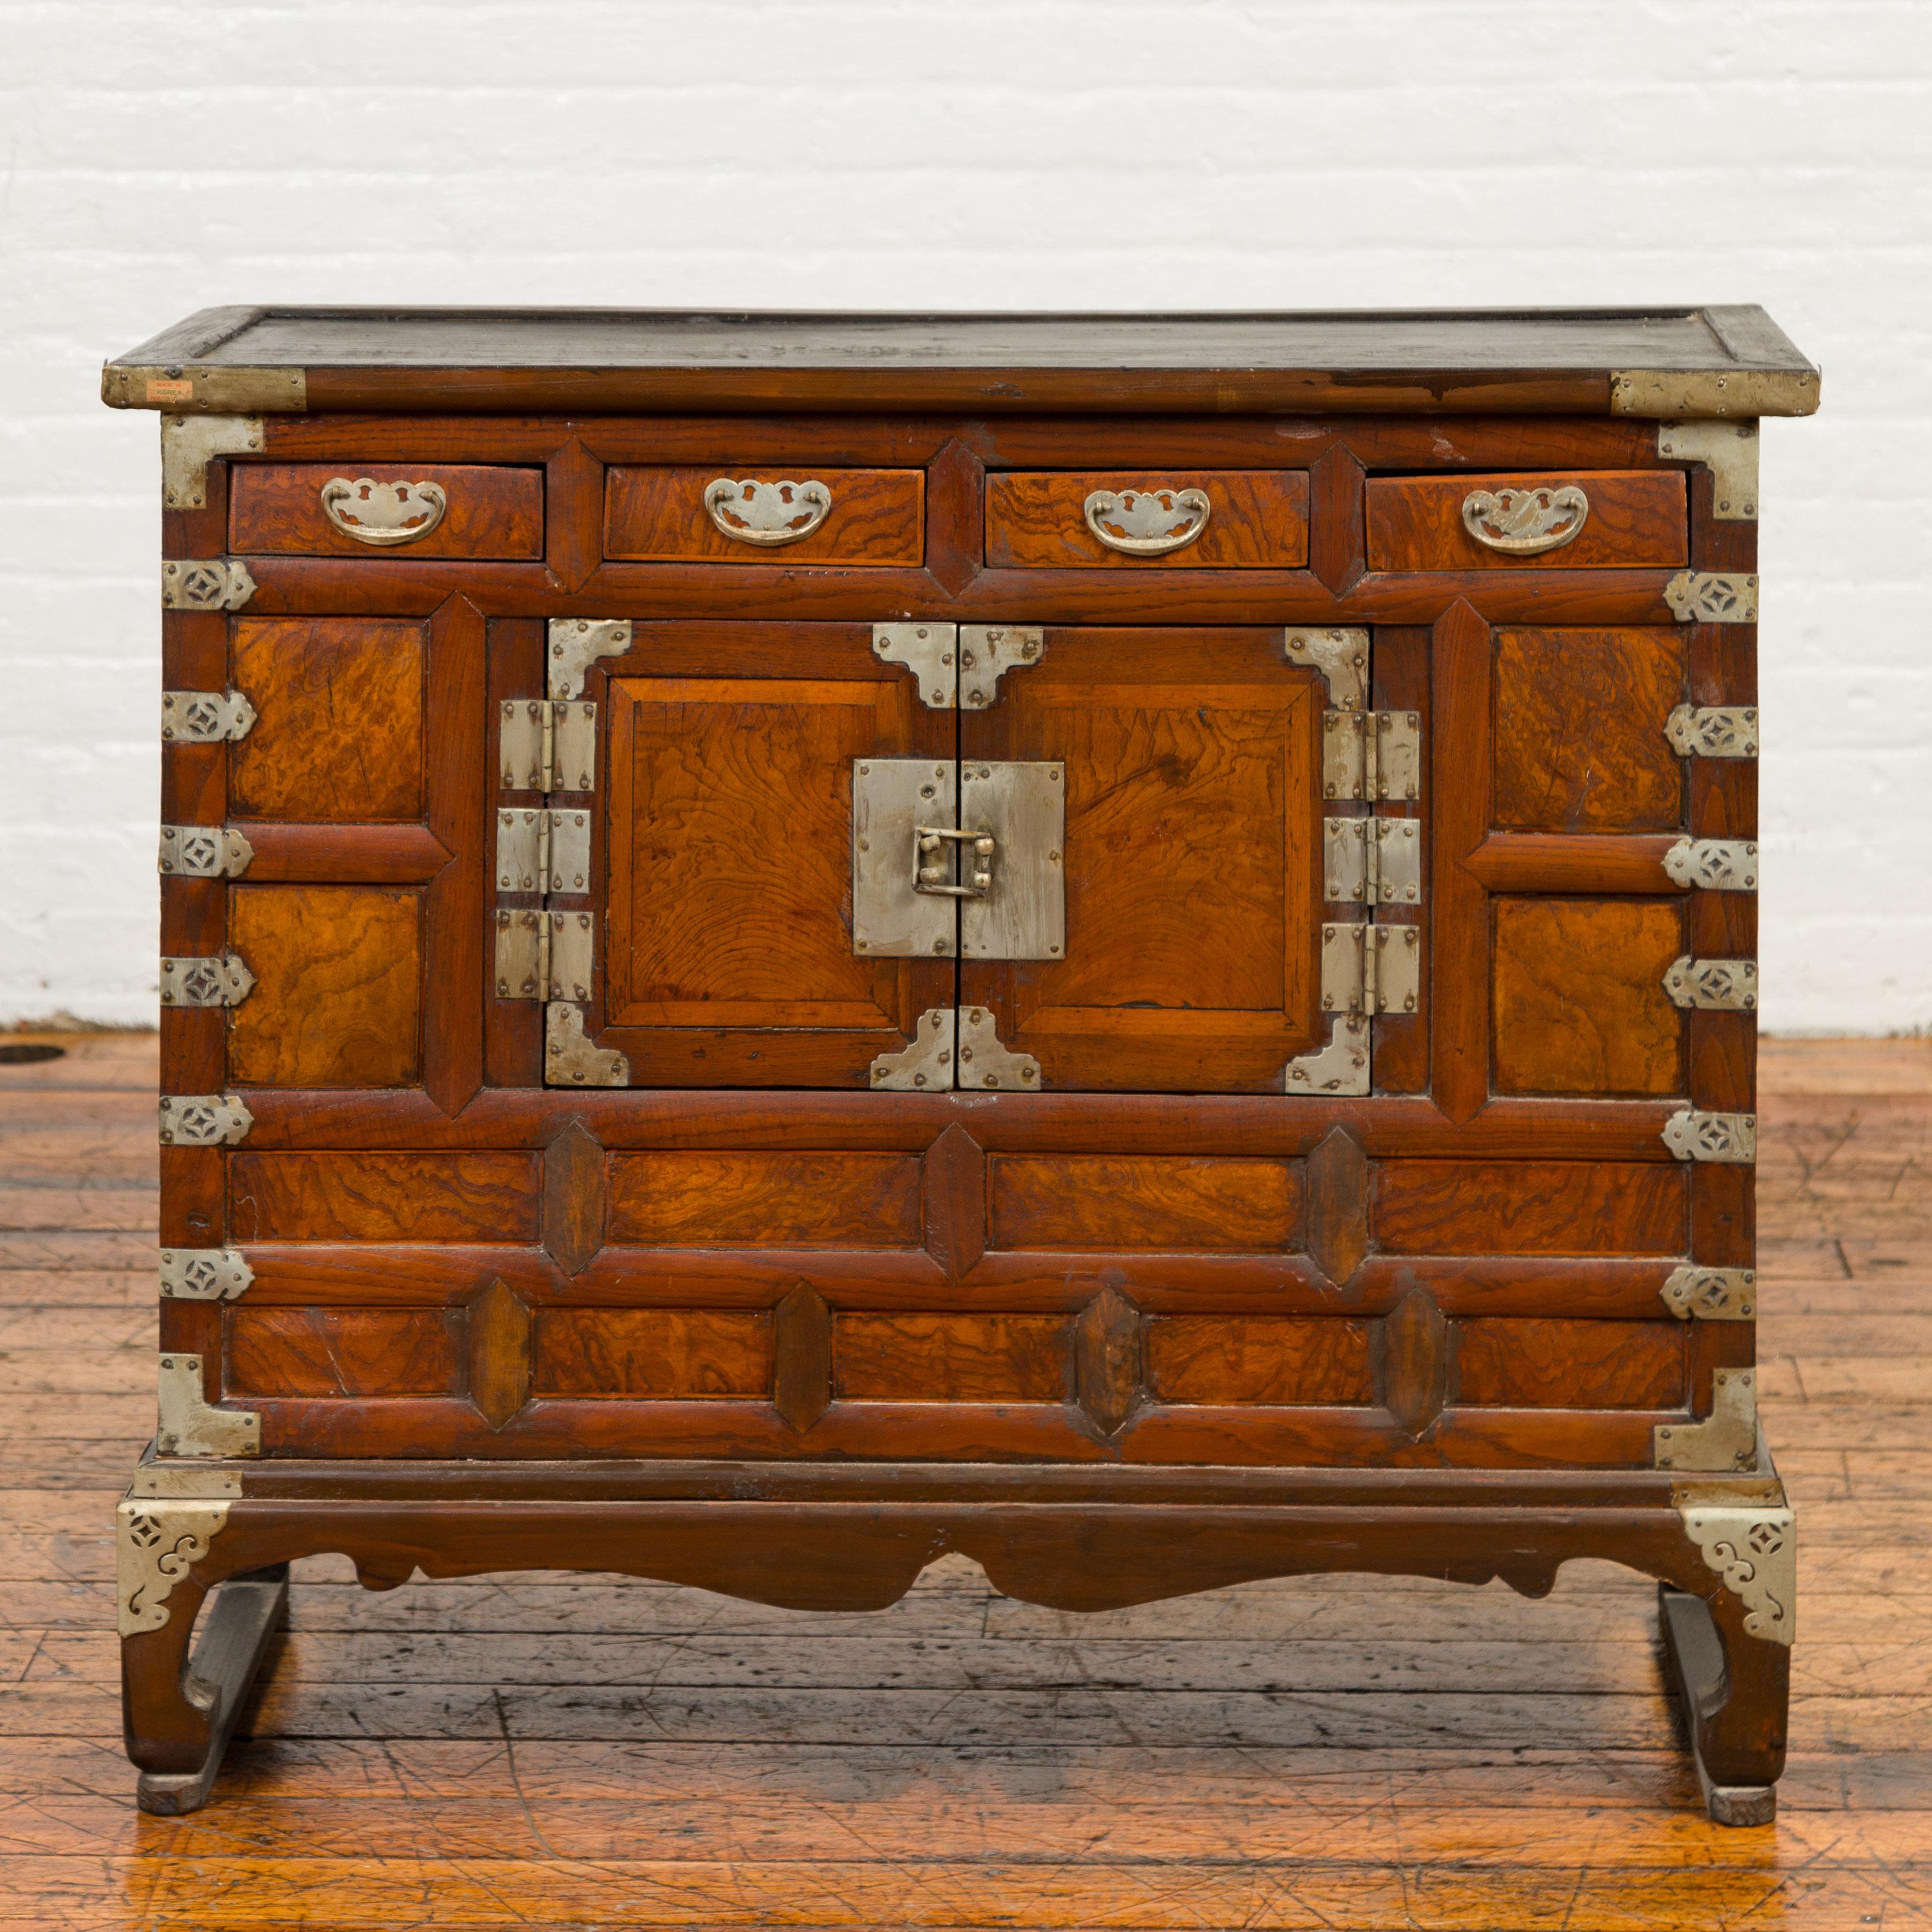 A Korean wooden side chest from the 19th century, with four drawers, double doors and white metal hardware. Born in Korea during the 19th century, this side chest features a rectangular top with slightly recessed central panel, sitting above a